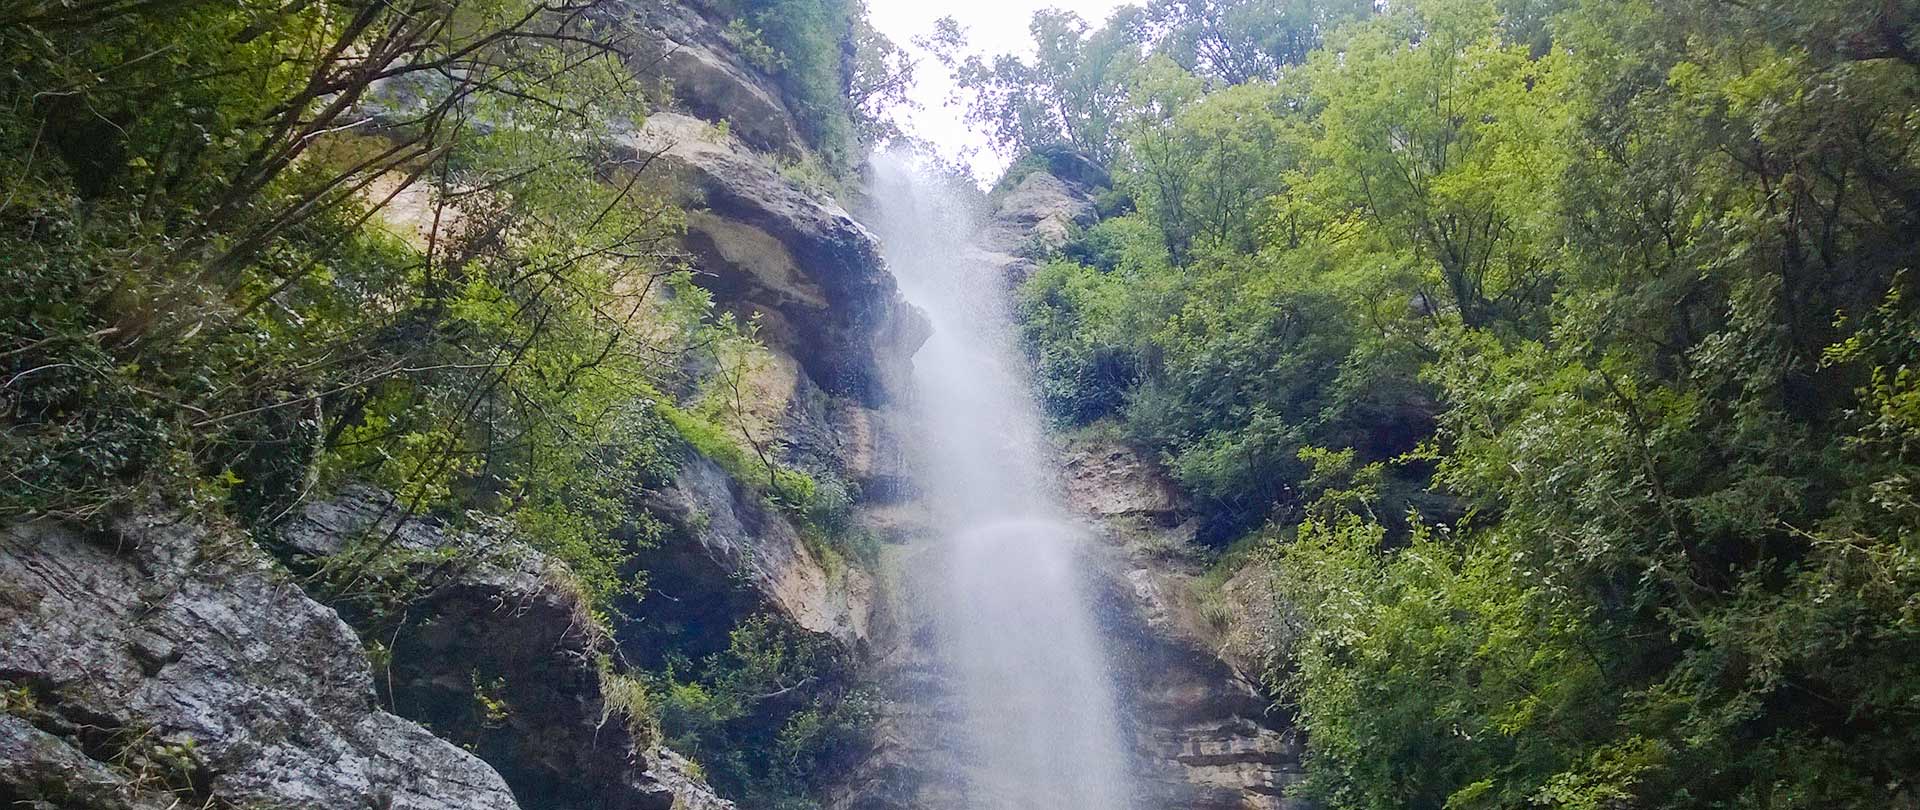 Waterfalls of Pach